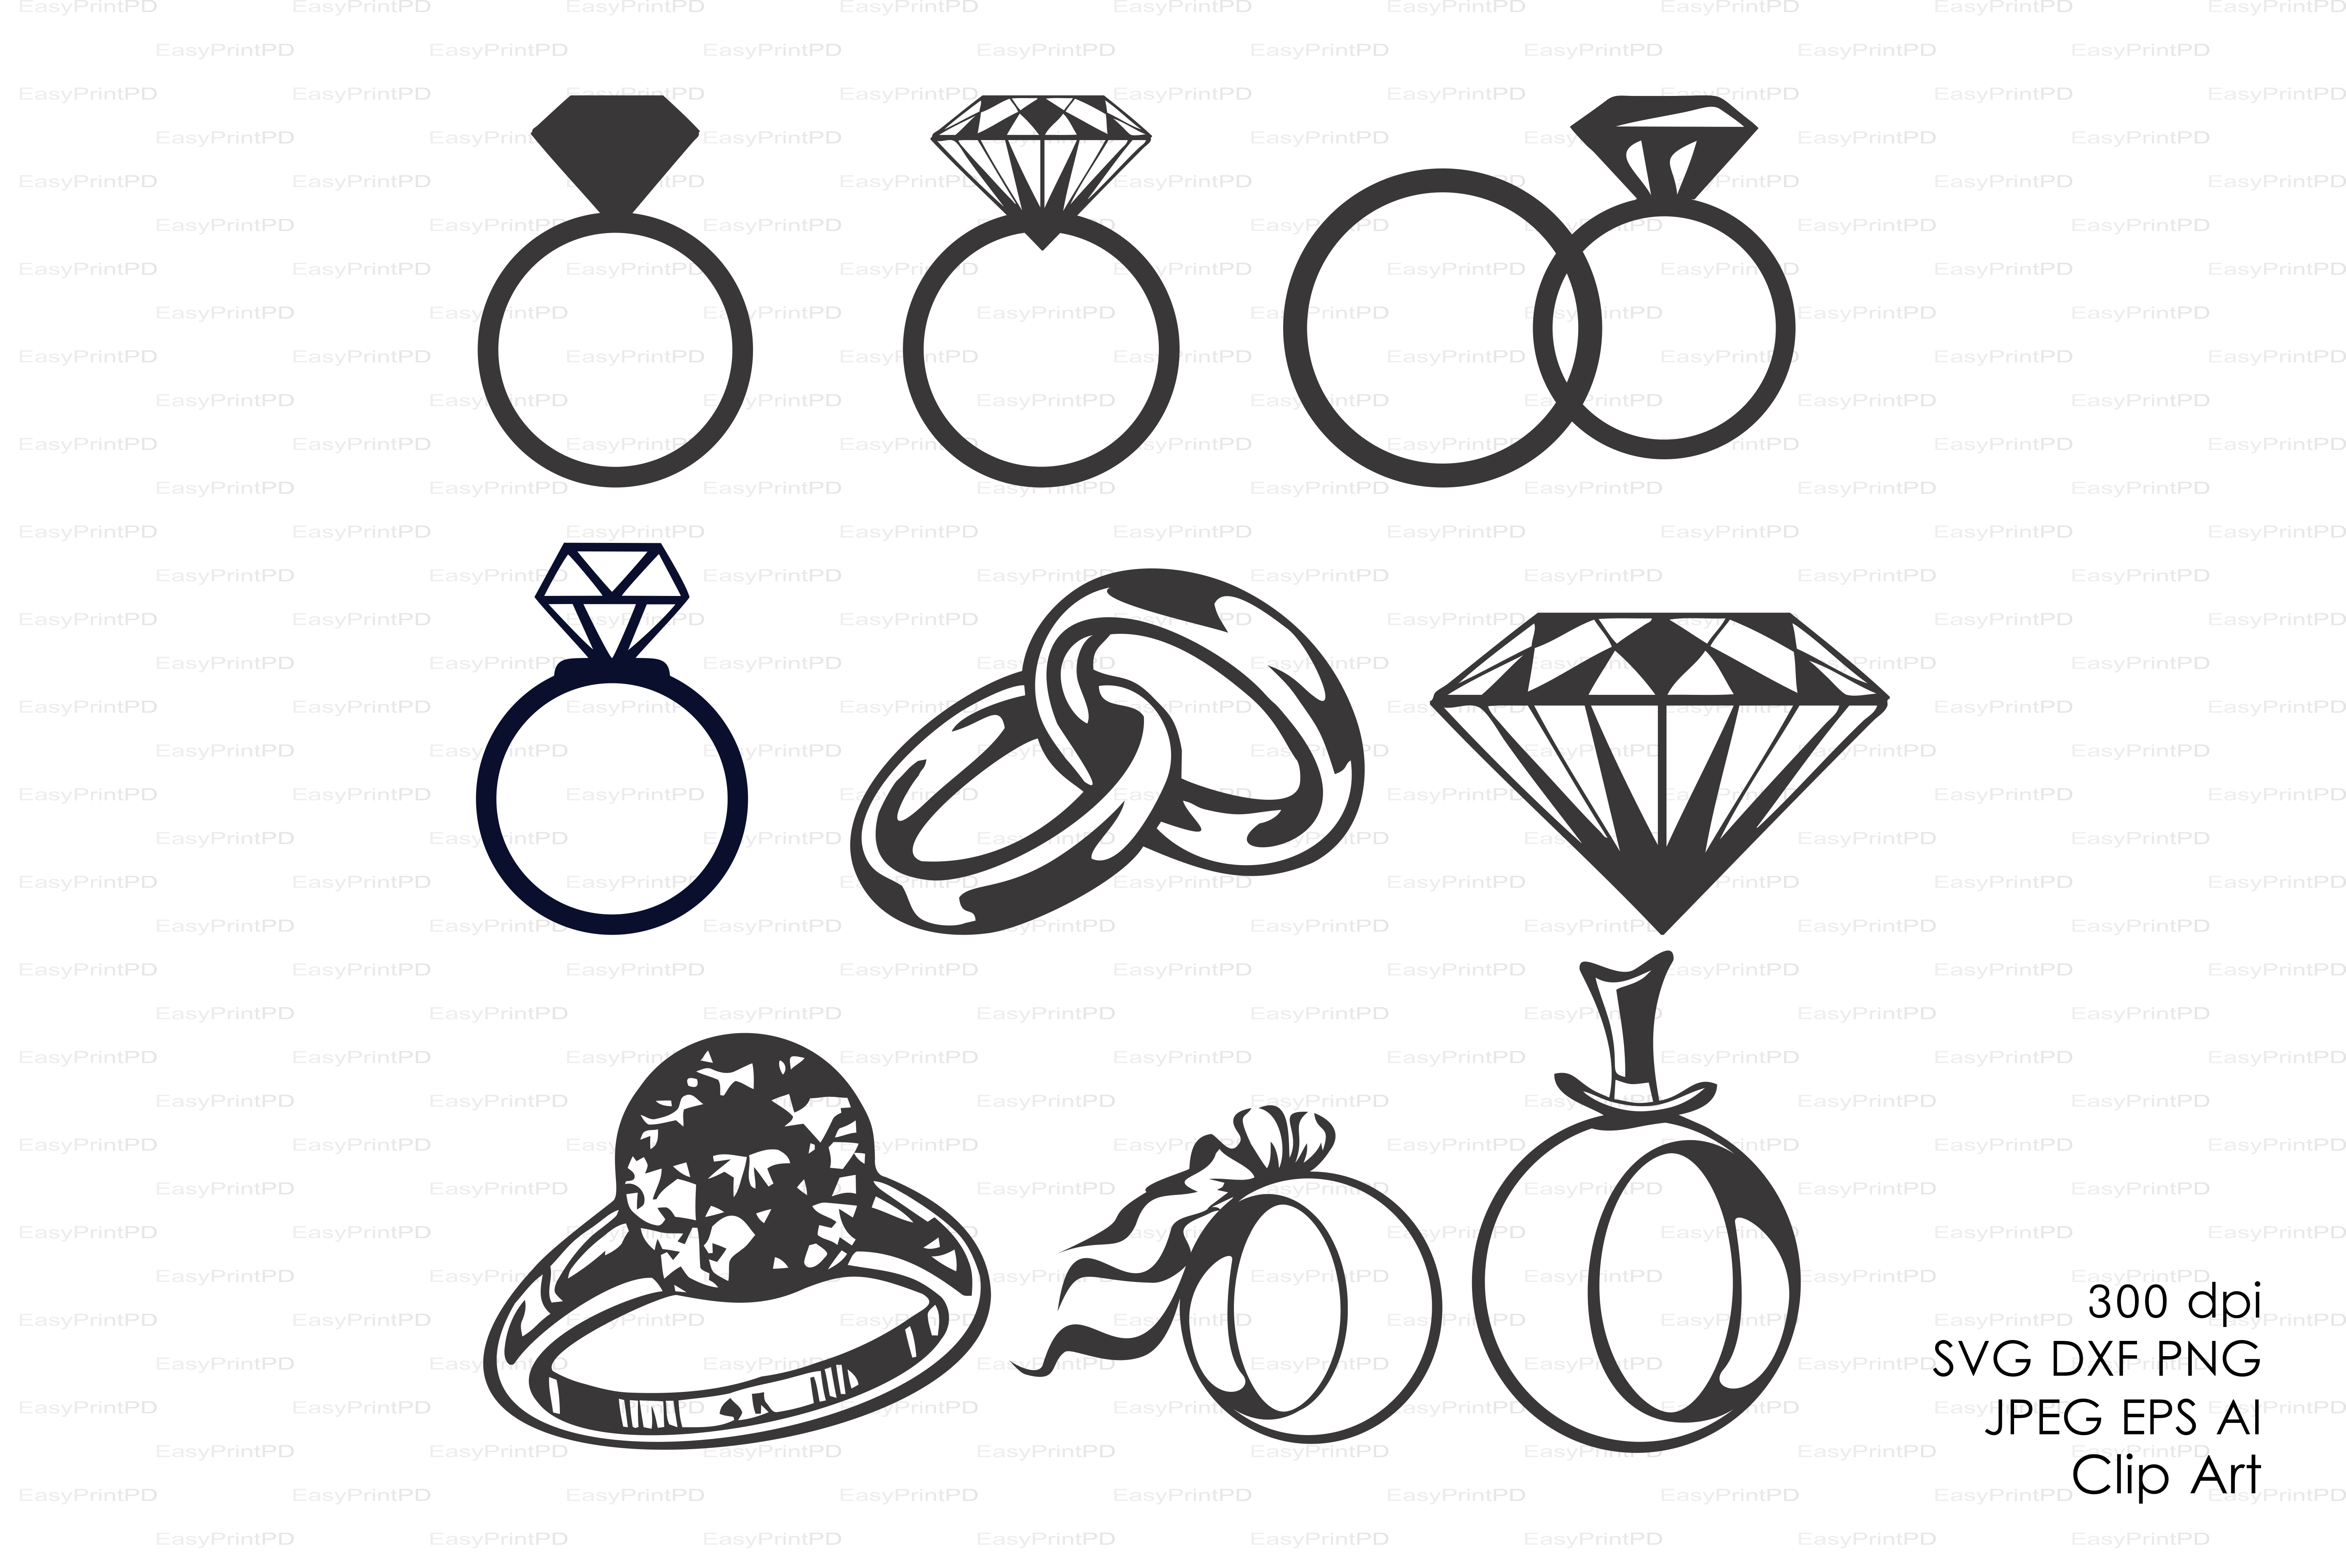 Download Wedding Diamond rings Vectors ~ Objects on Creative Market